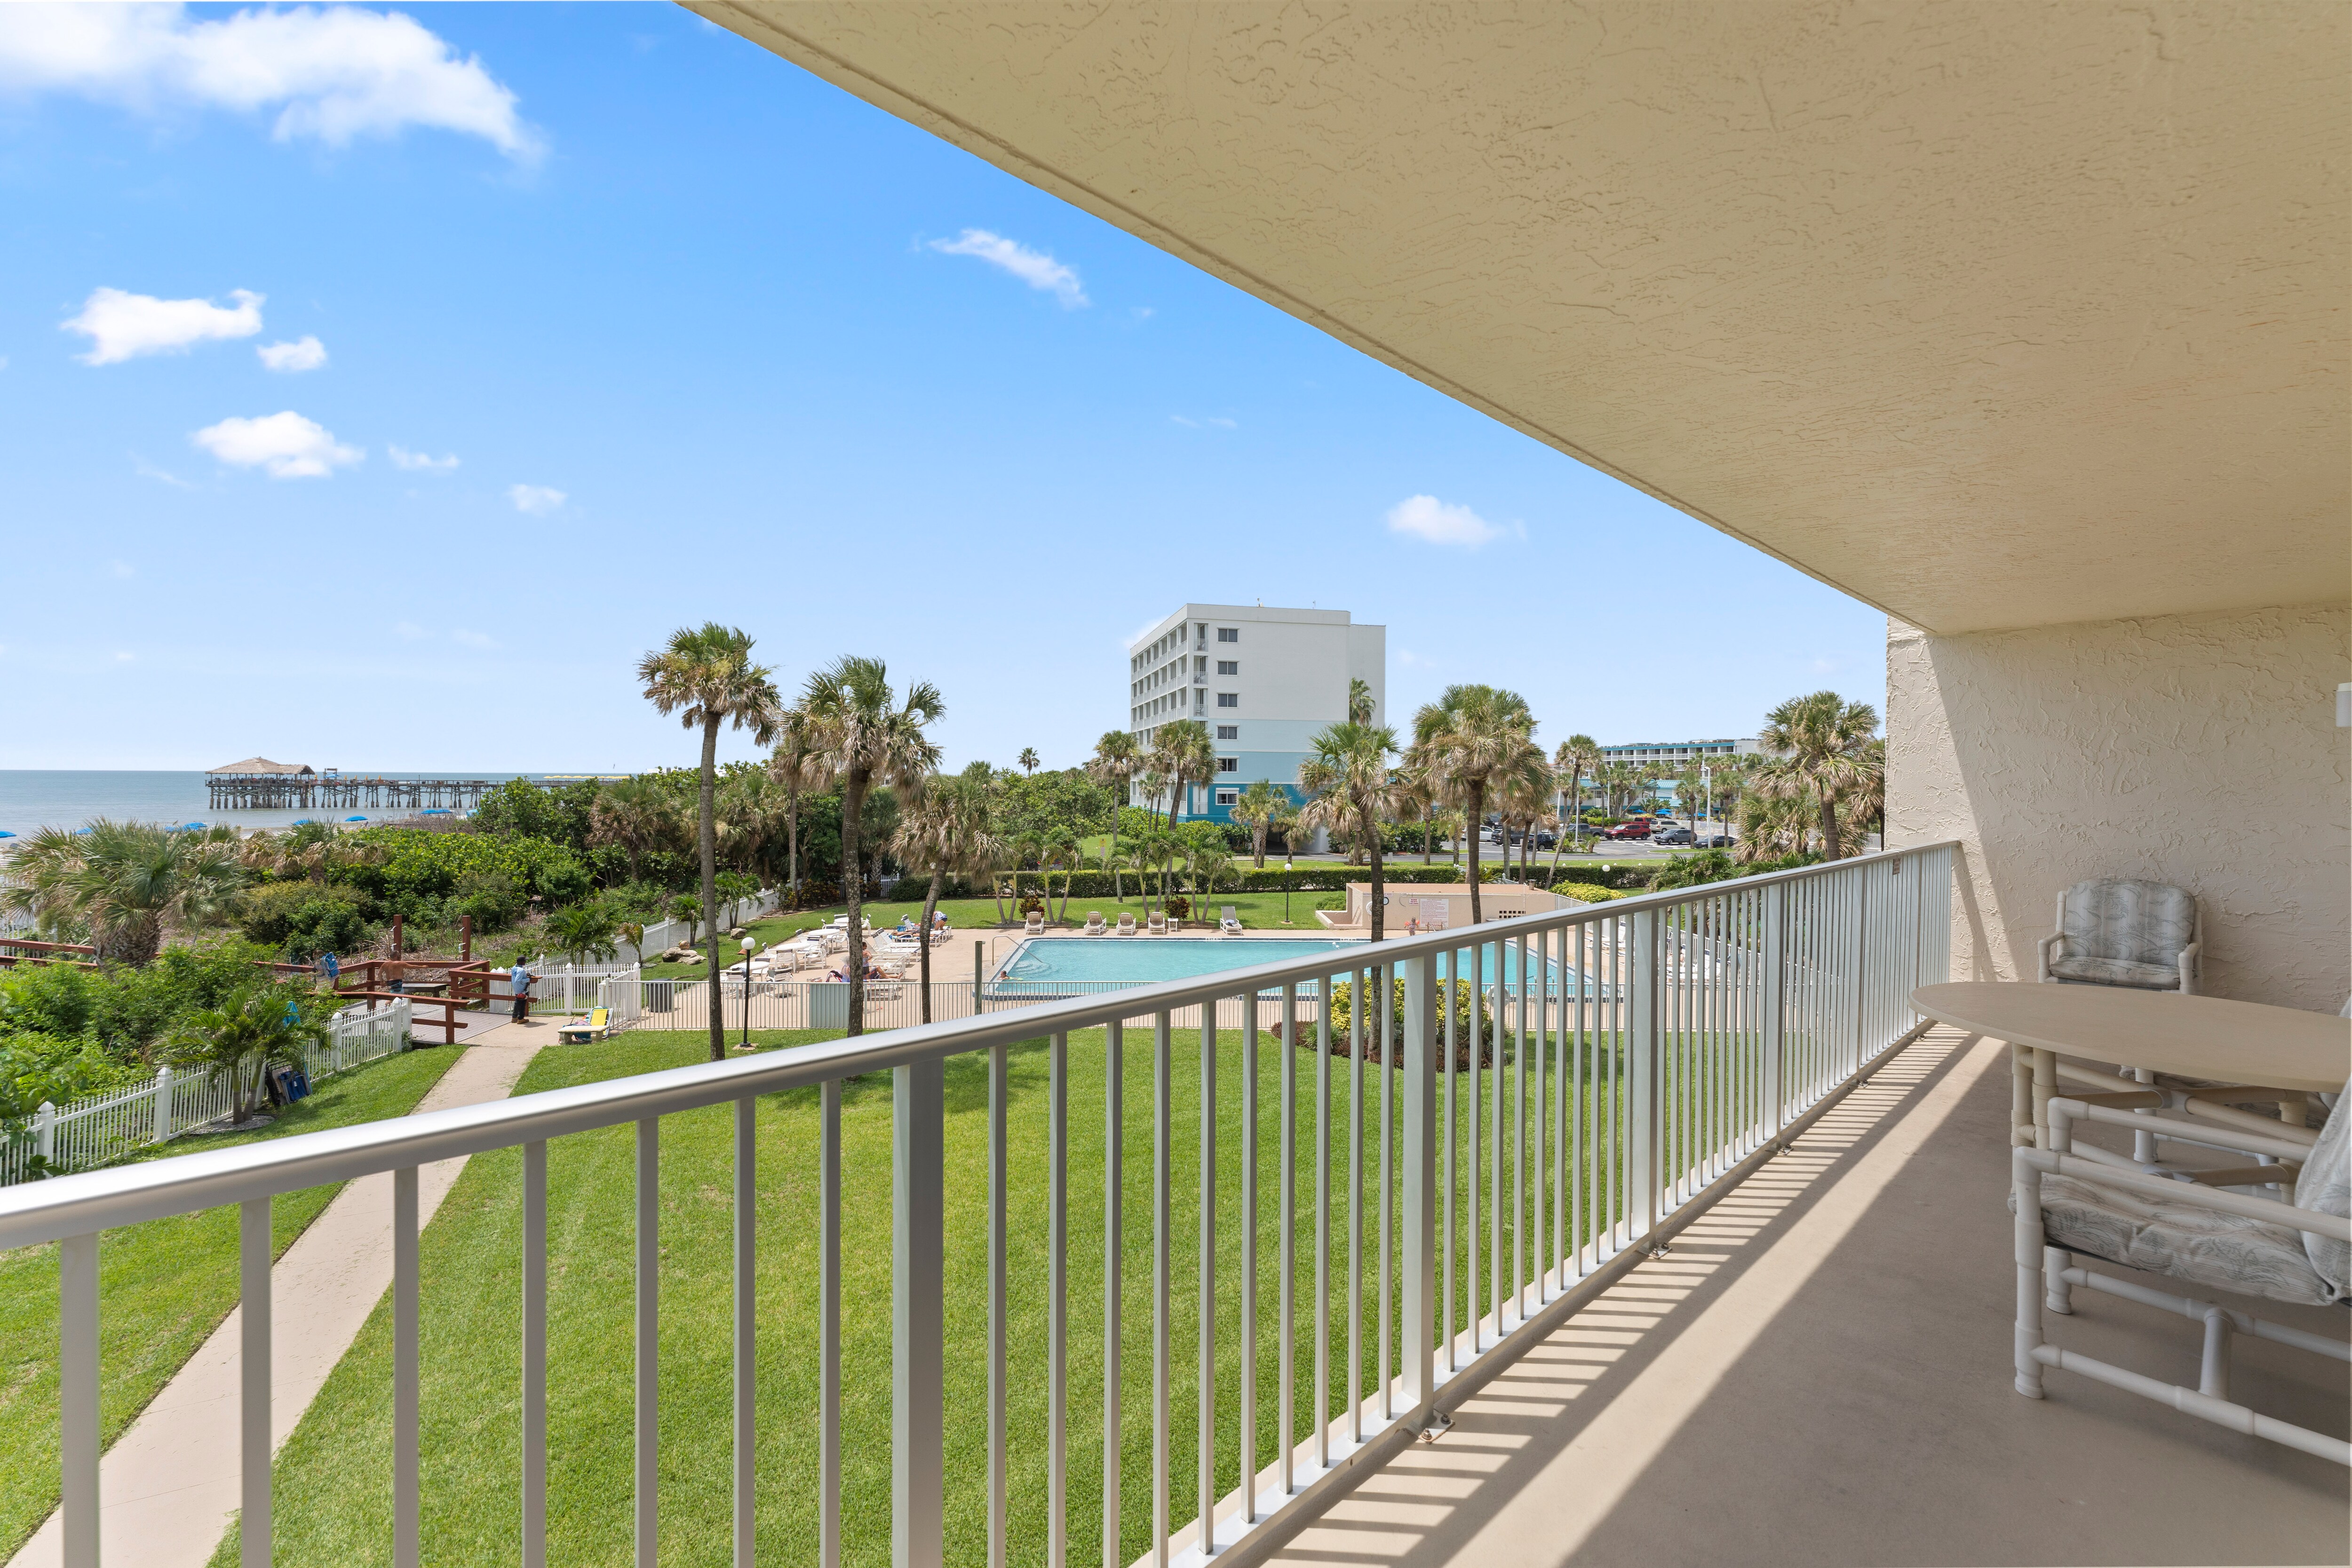 Spacious balcony running the length of the condo with Ocean-front views!